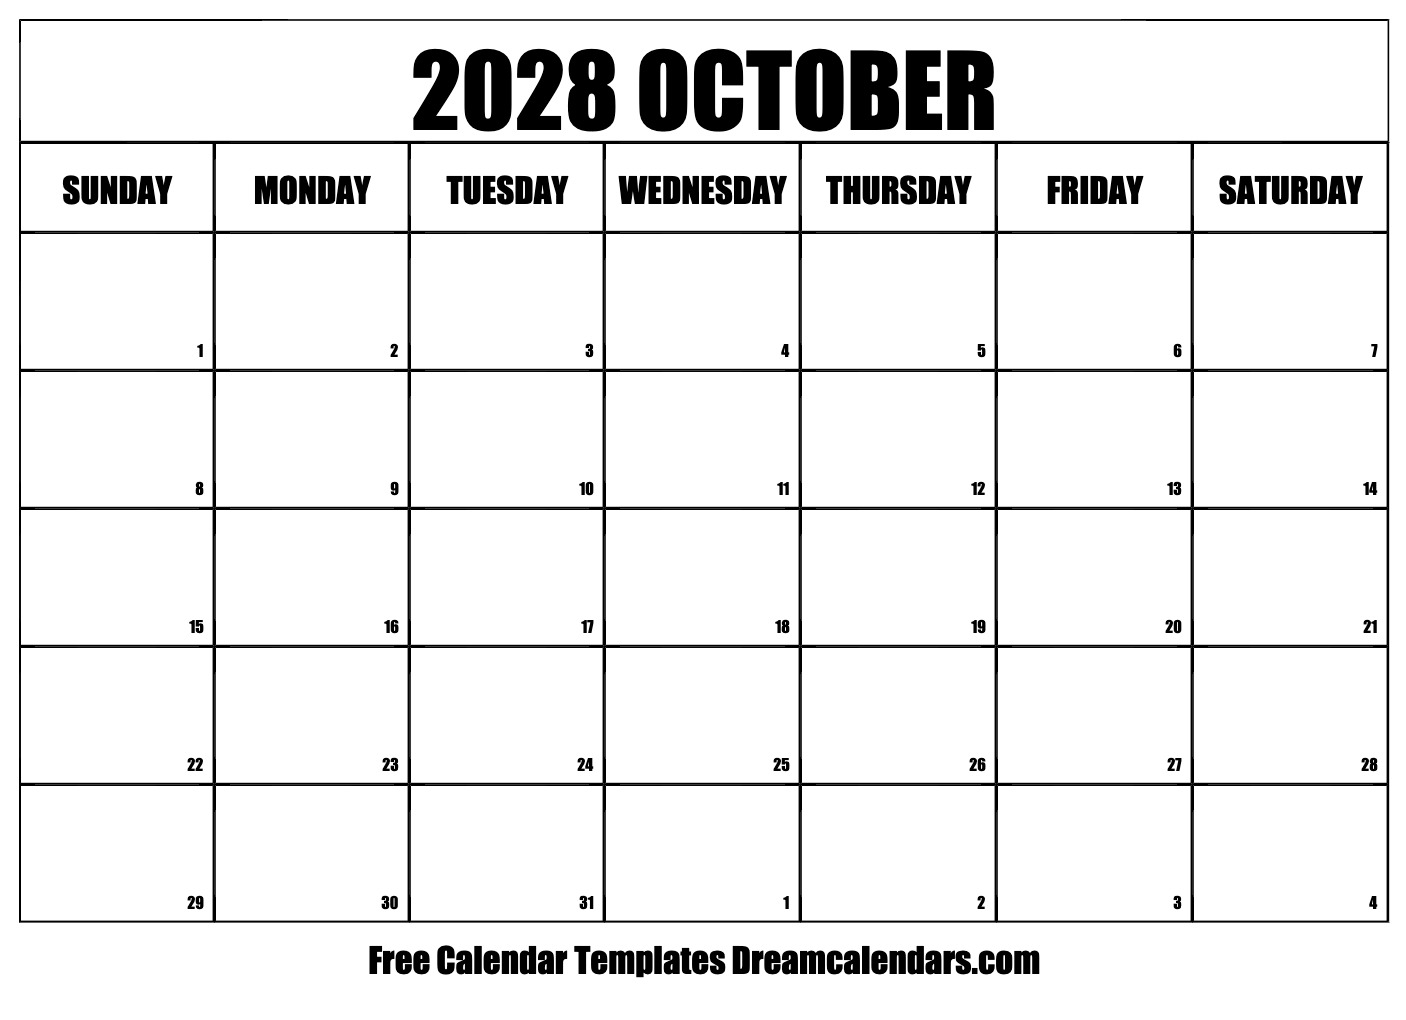 October 2028 Calendar Free Blank Printable With Holidays